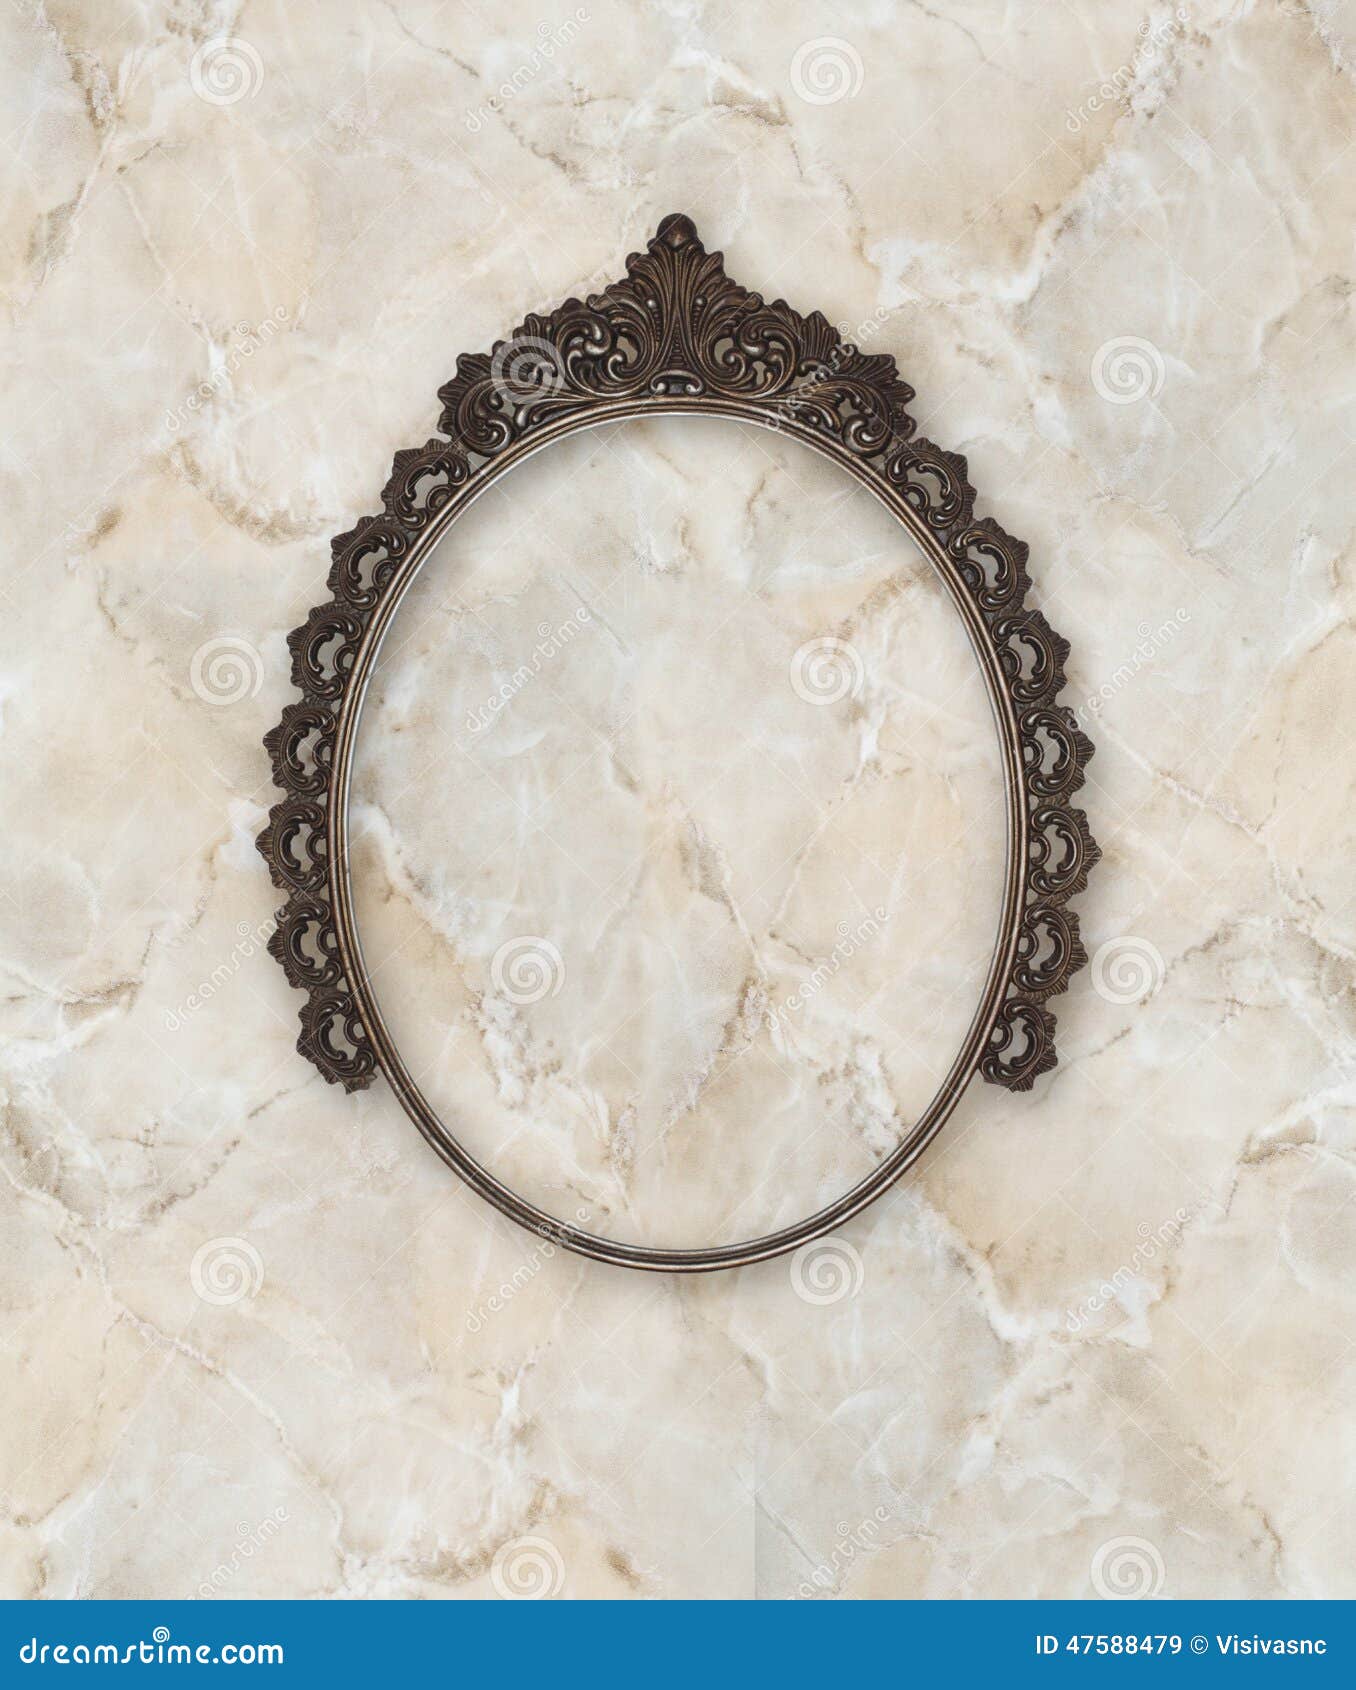 old oval picture frame metal worked on marble background